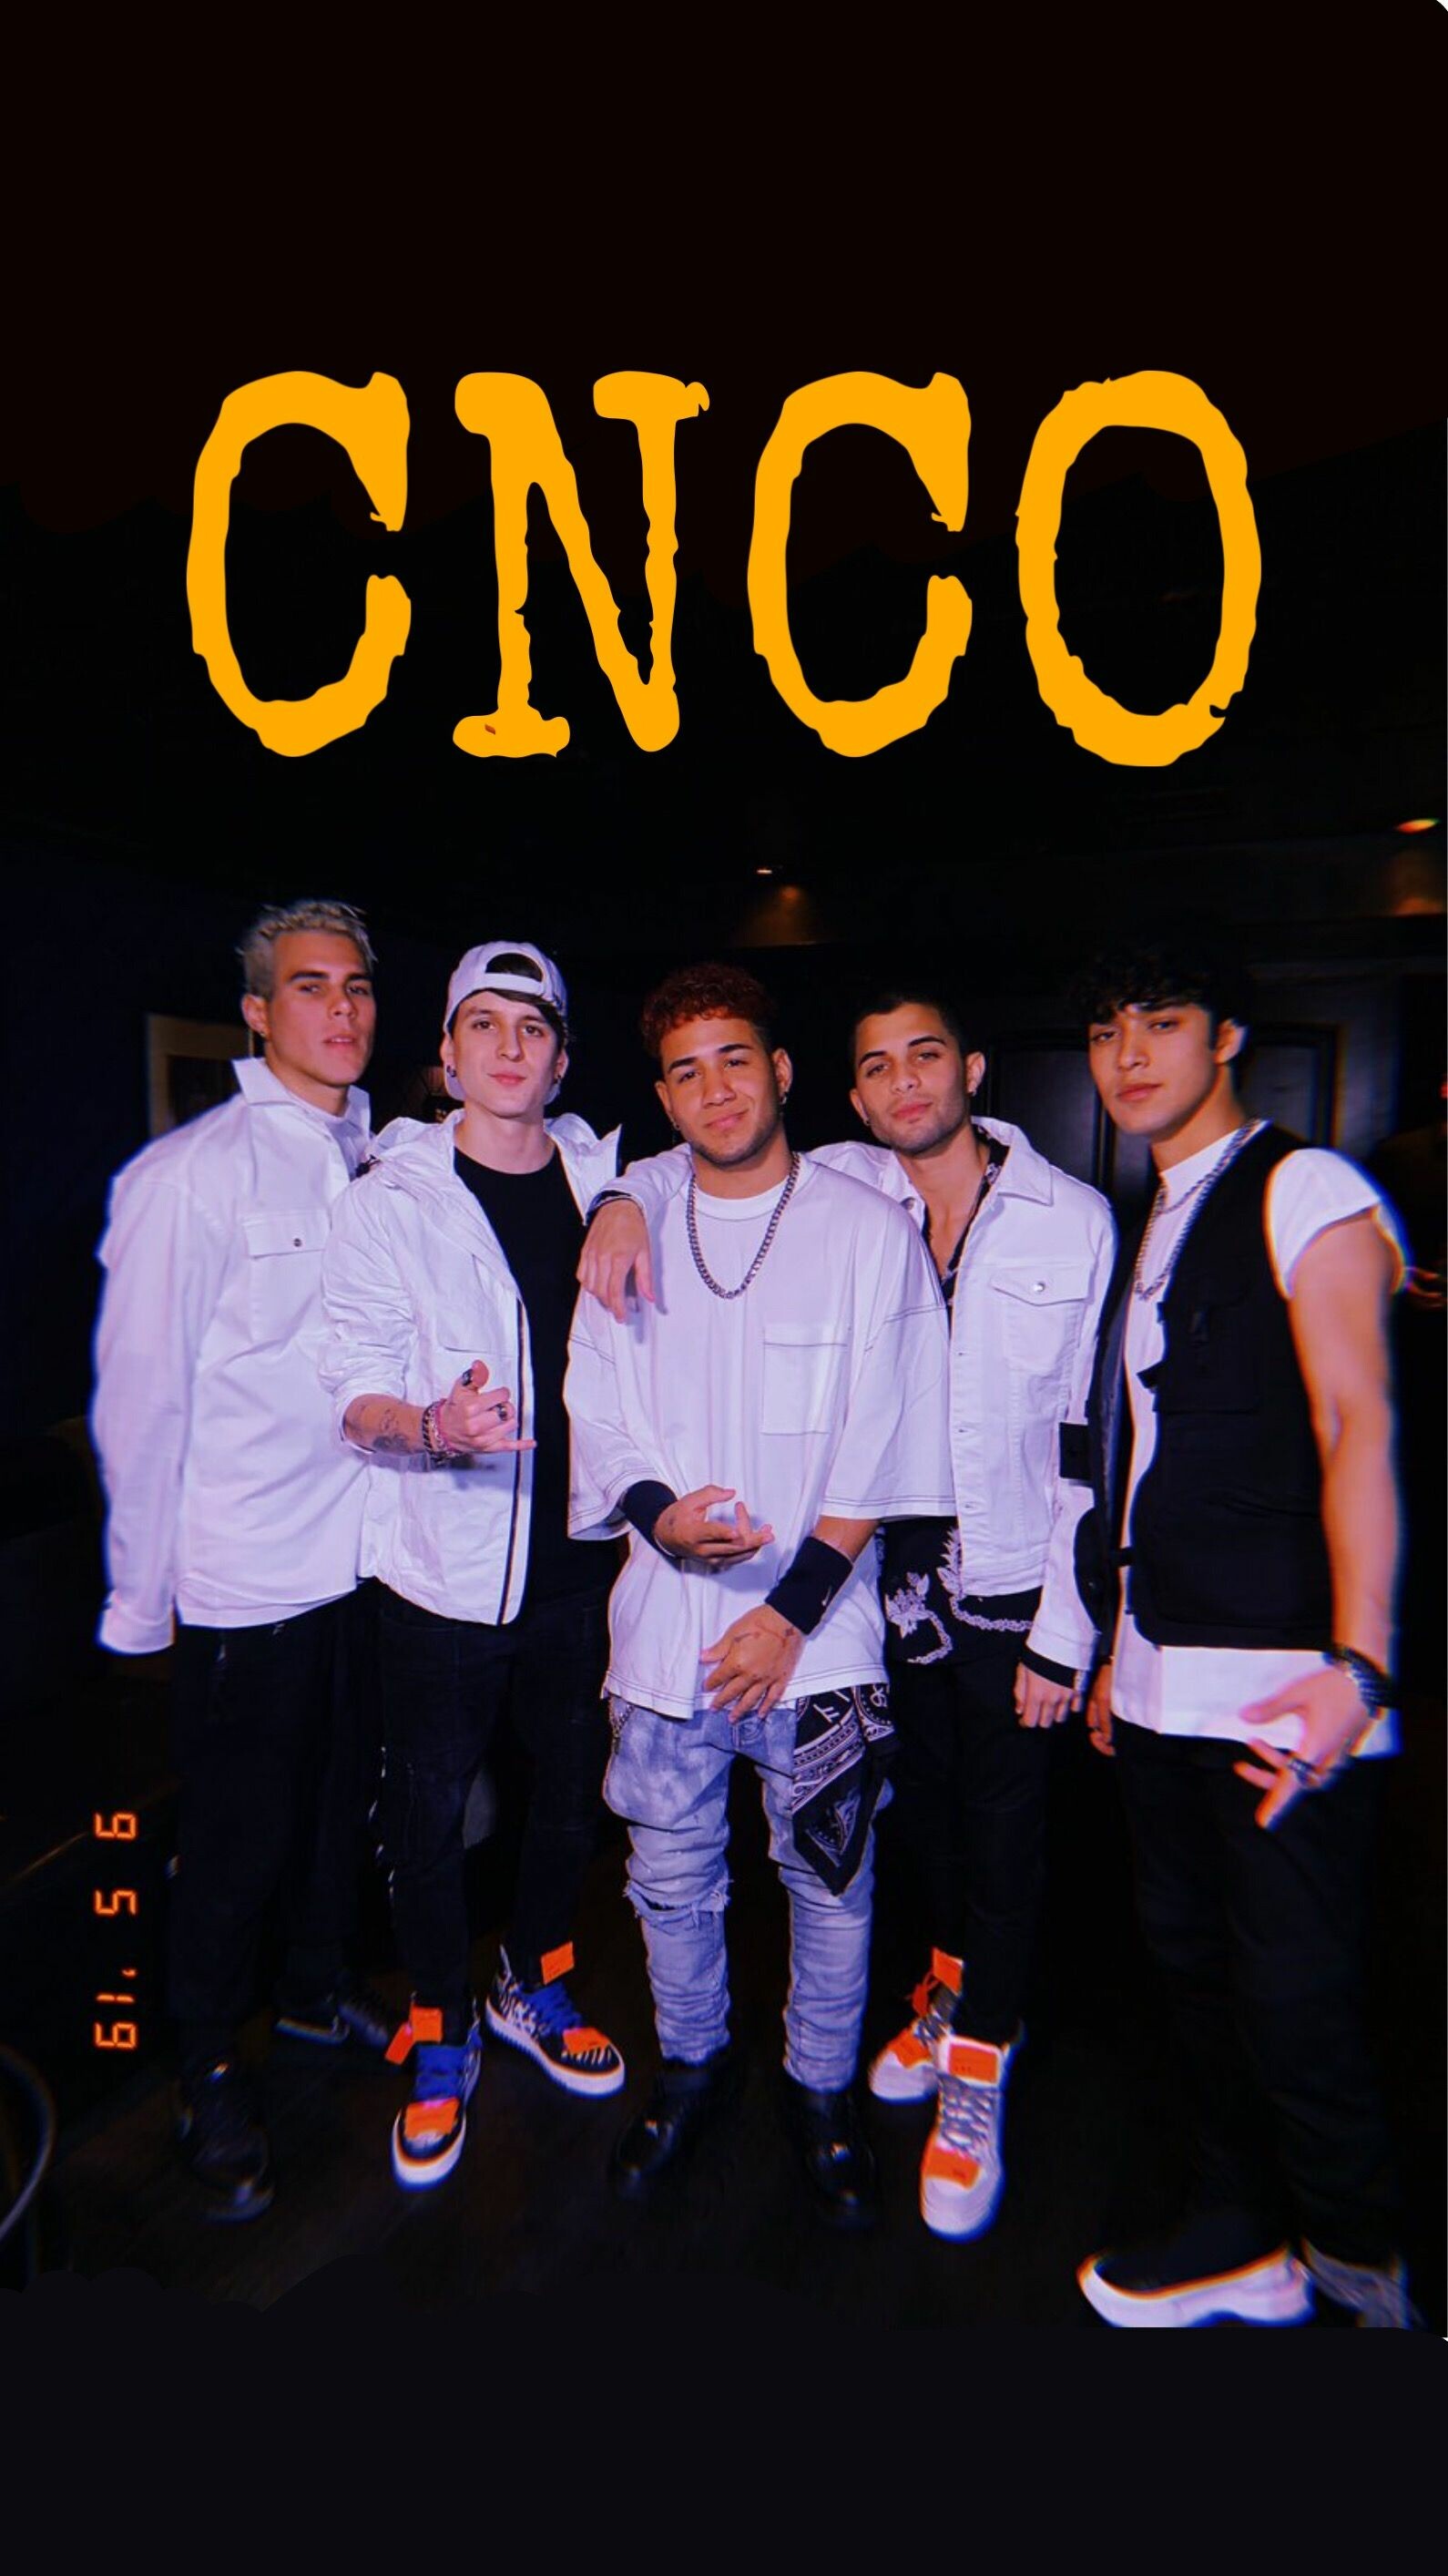 CNCO music, Latin American boy band, Movie posters, CNCO fans, 1590x2830 HD Phone